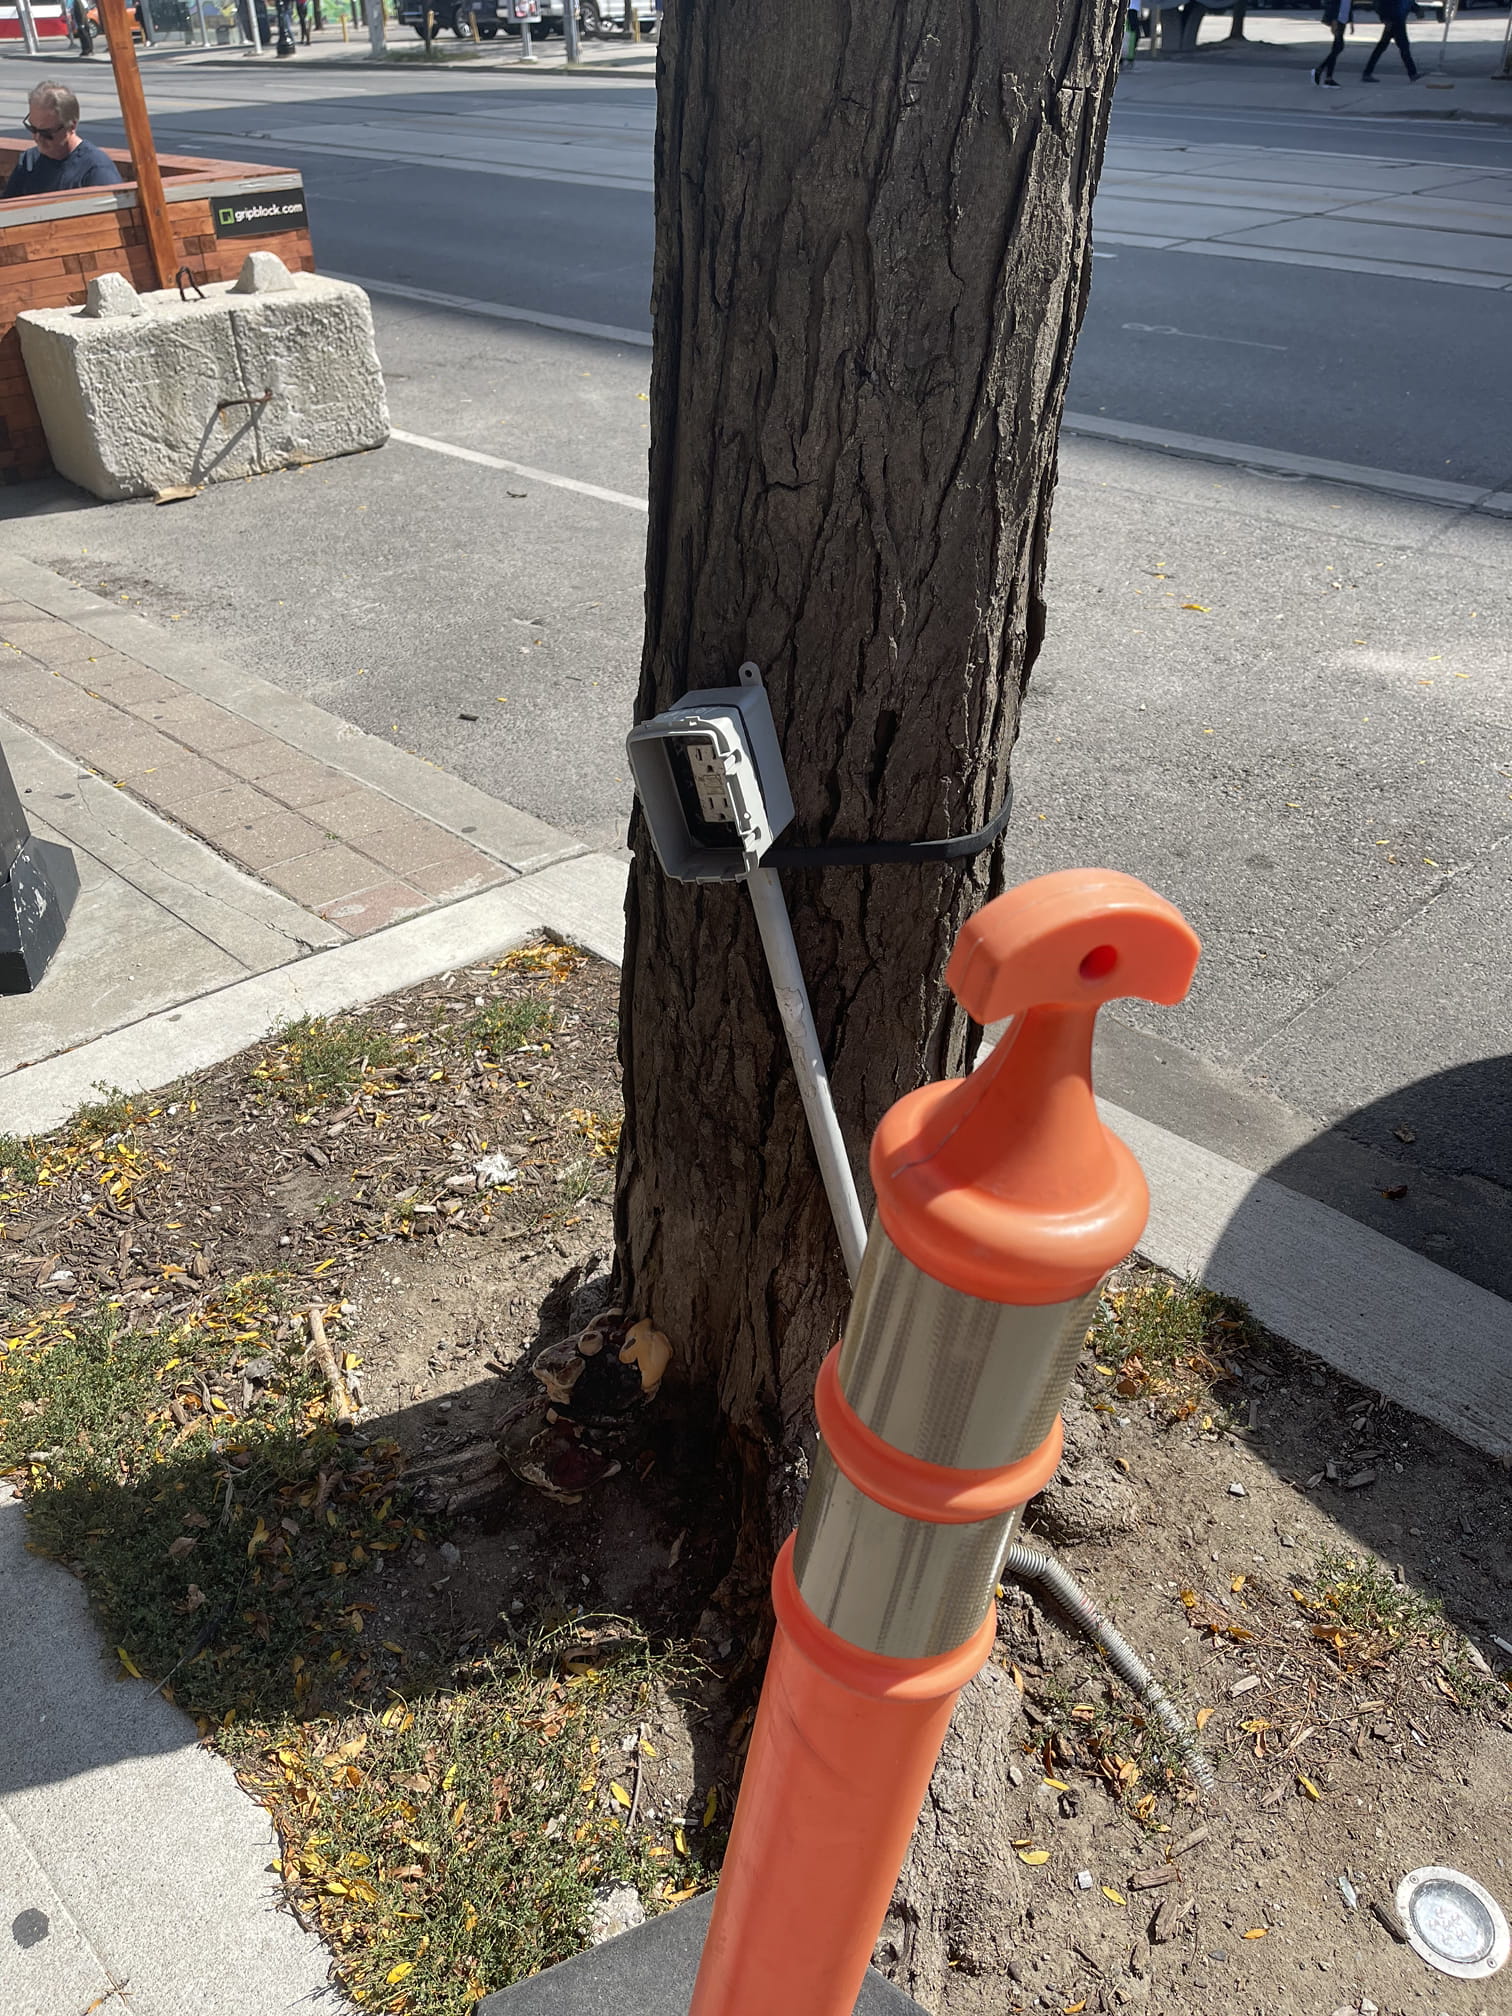 Outlet on a tree next to a pedestrian traffic cone with the road visible